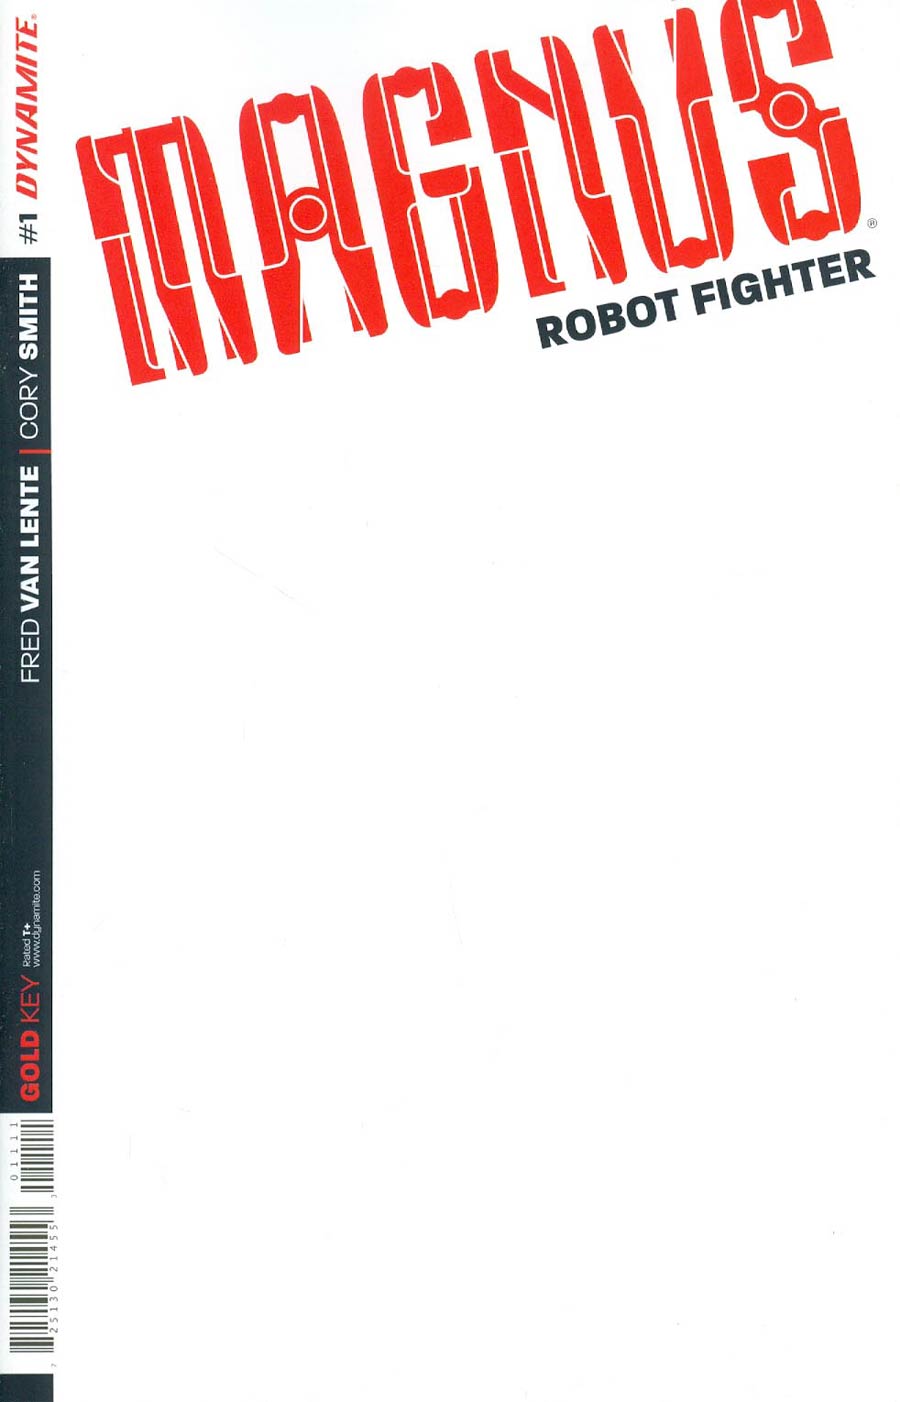 Magnus Robot Fighter Vol 4 #1 Cover C Variant Blank Authentix Cover